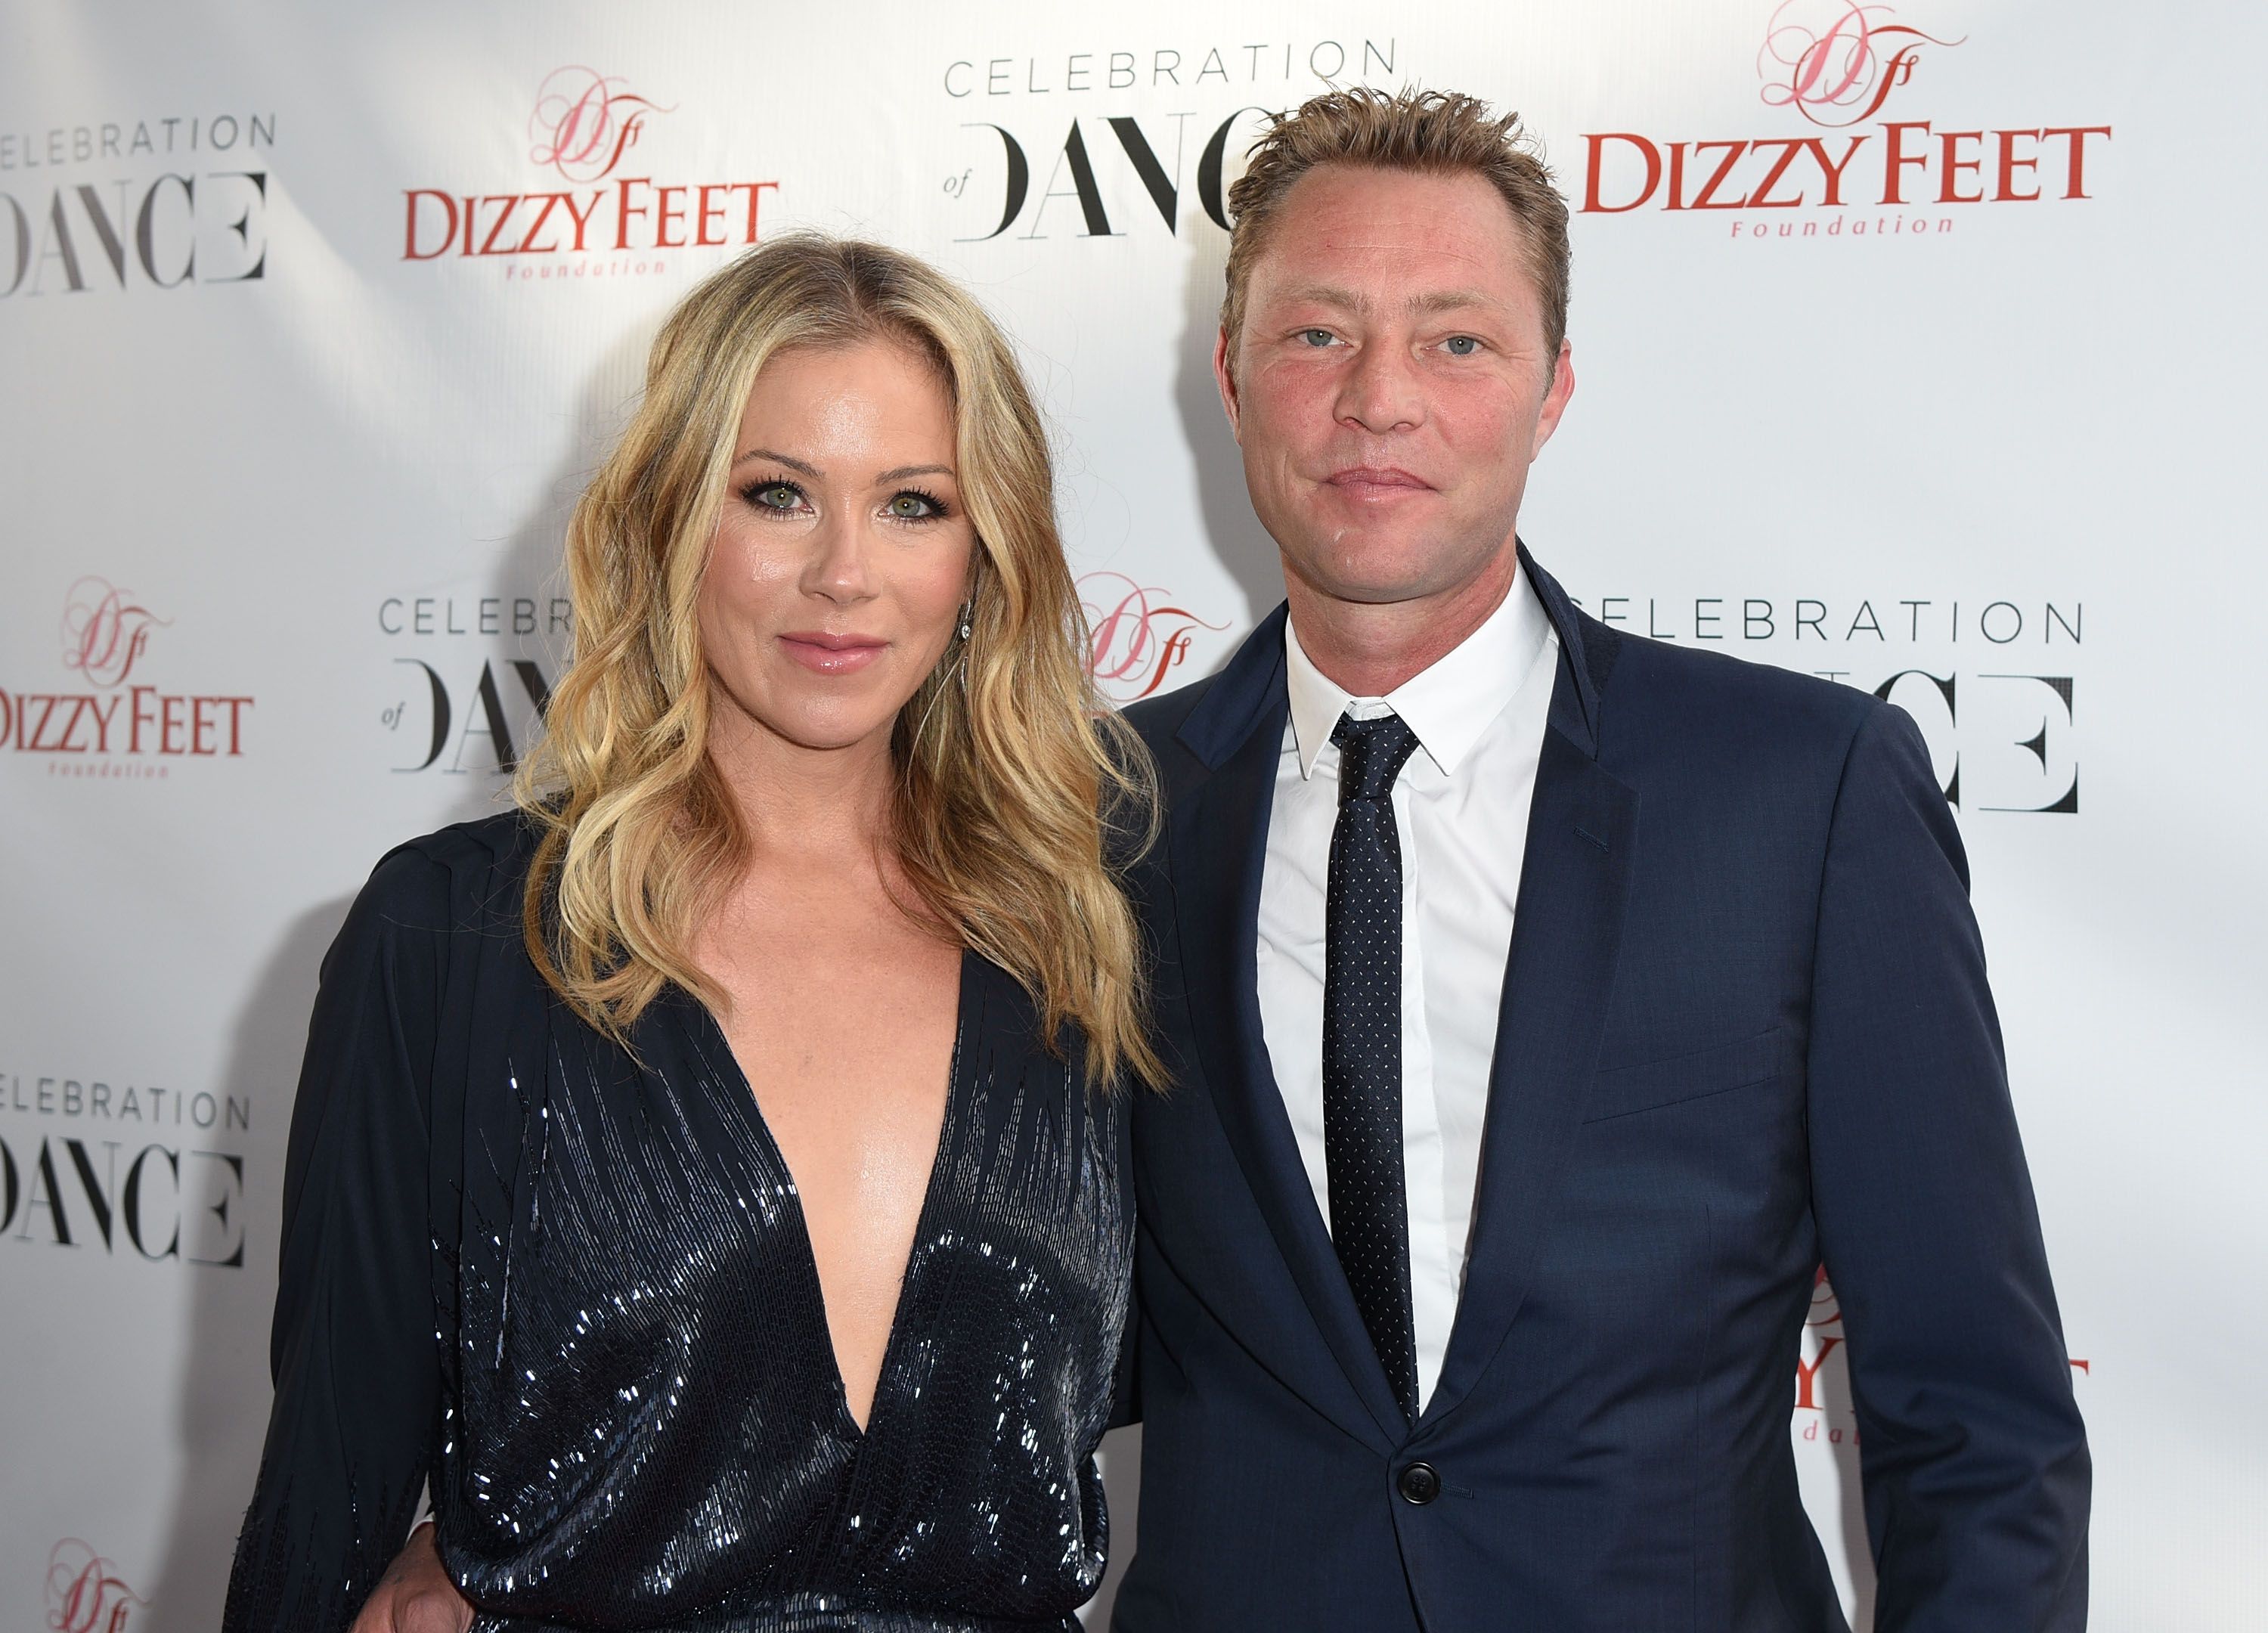 Christina Applegate and Martyn LeNoble during the 5th Annual Celebration of Dance Gala presented By The Dizzy Feet Foundation at Club Nokia on August 1, 2015, in Los Angeles, California. | Source: Getty Images